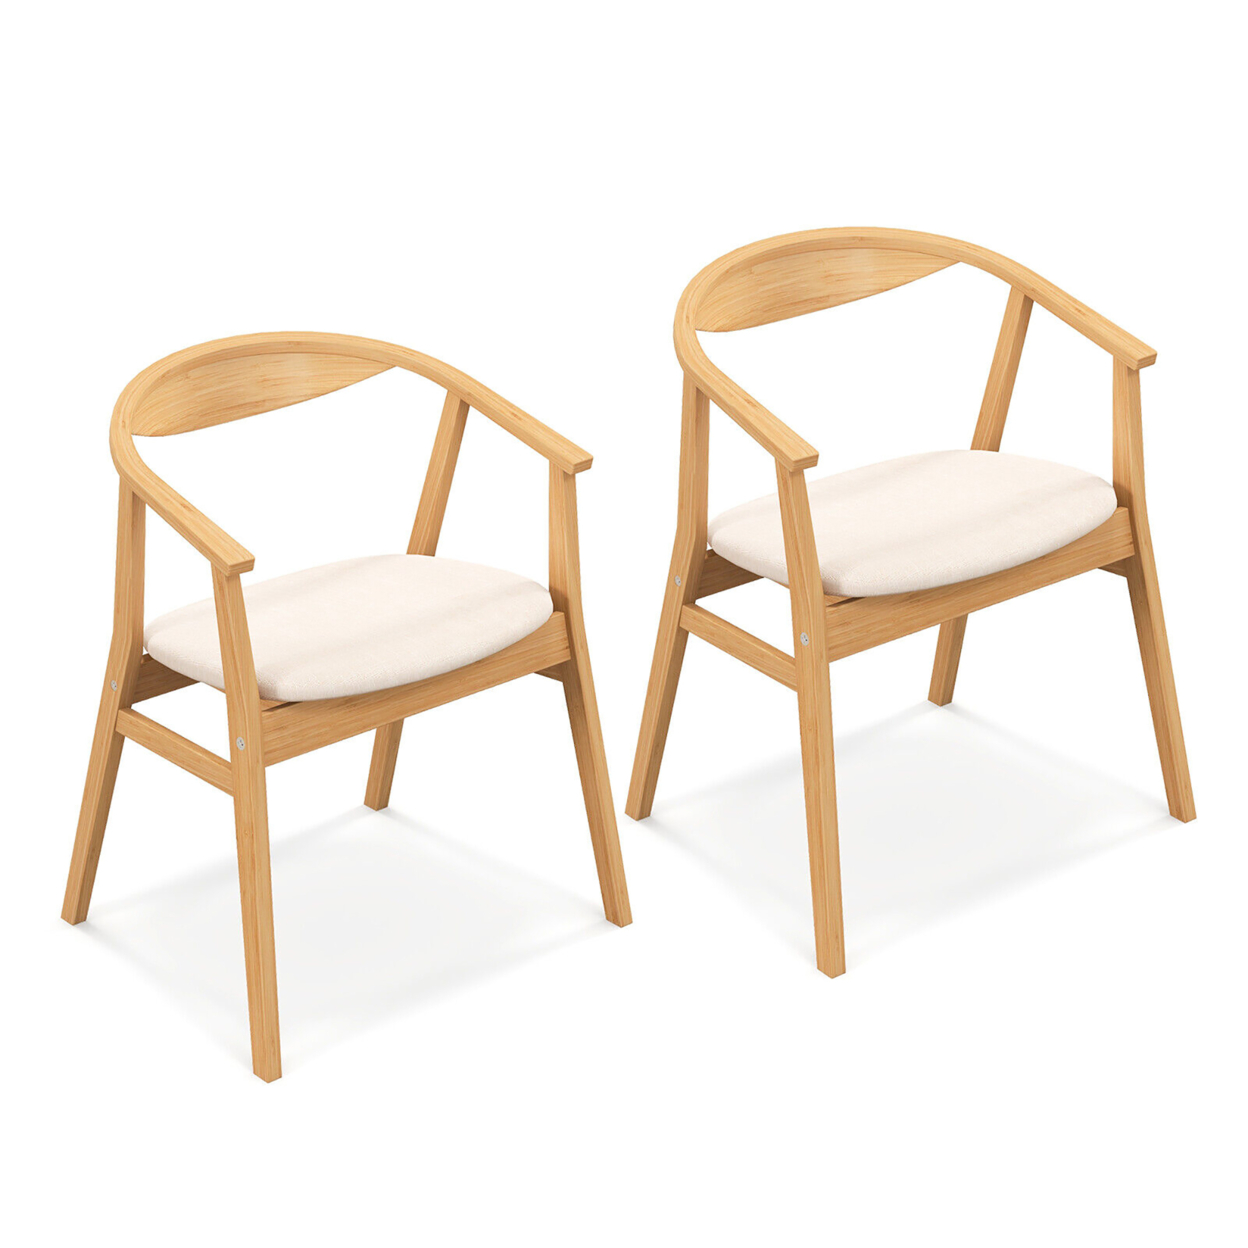 Set Of 2 Leisure Bamboo Armchair Accent Chair W/ Curved Back & Bamboo Structure